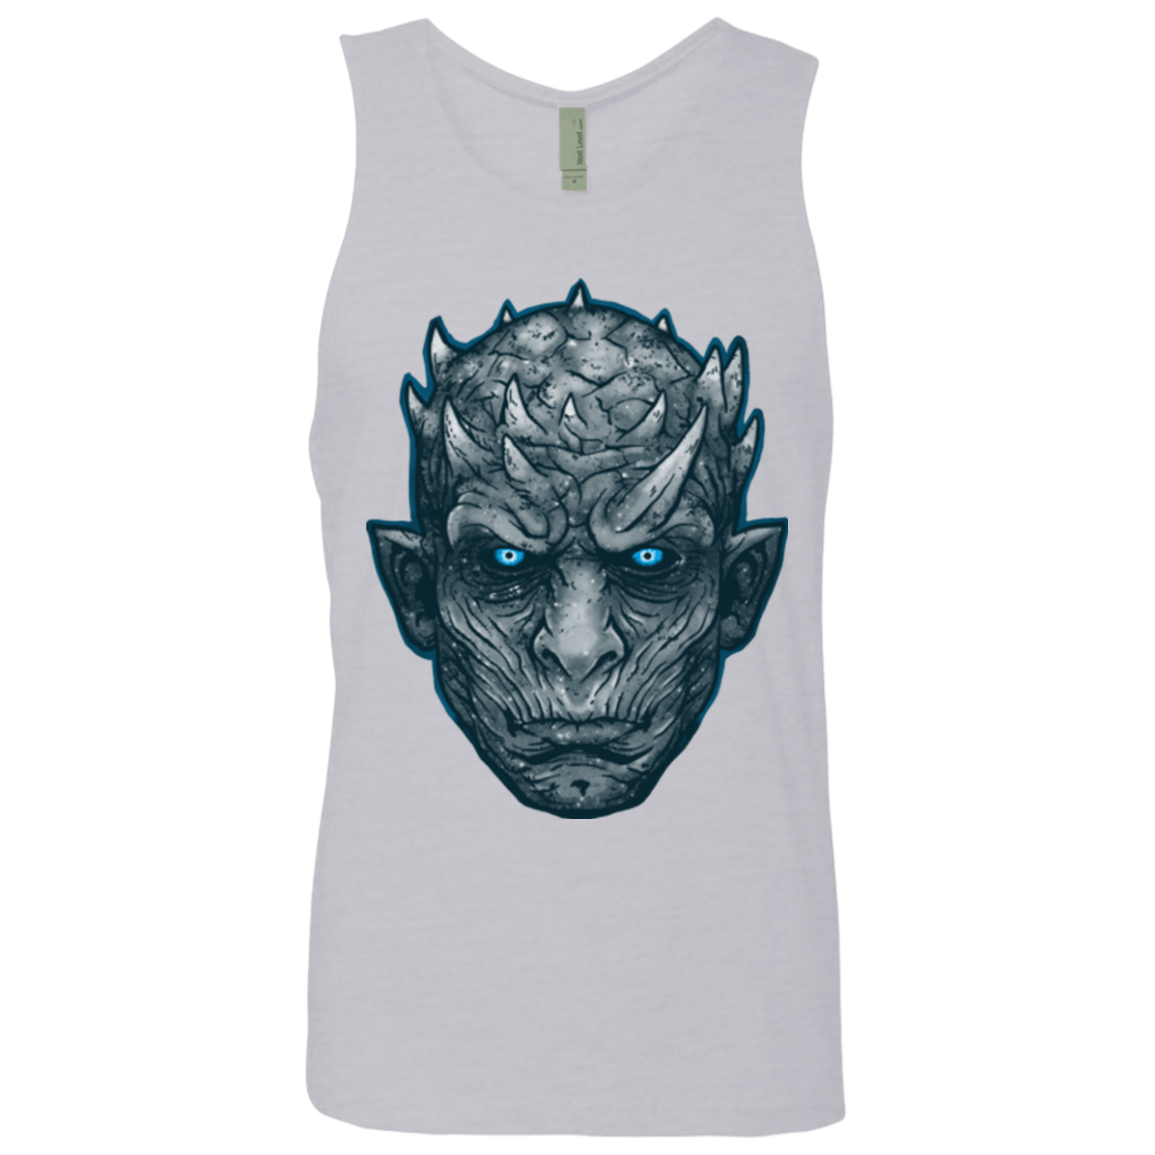 T-Shirts Heather Grey / Small The Other King2 Men's Premium Tank Top